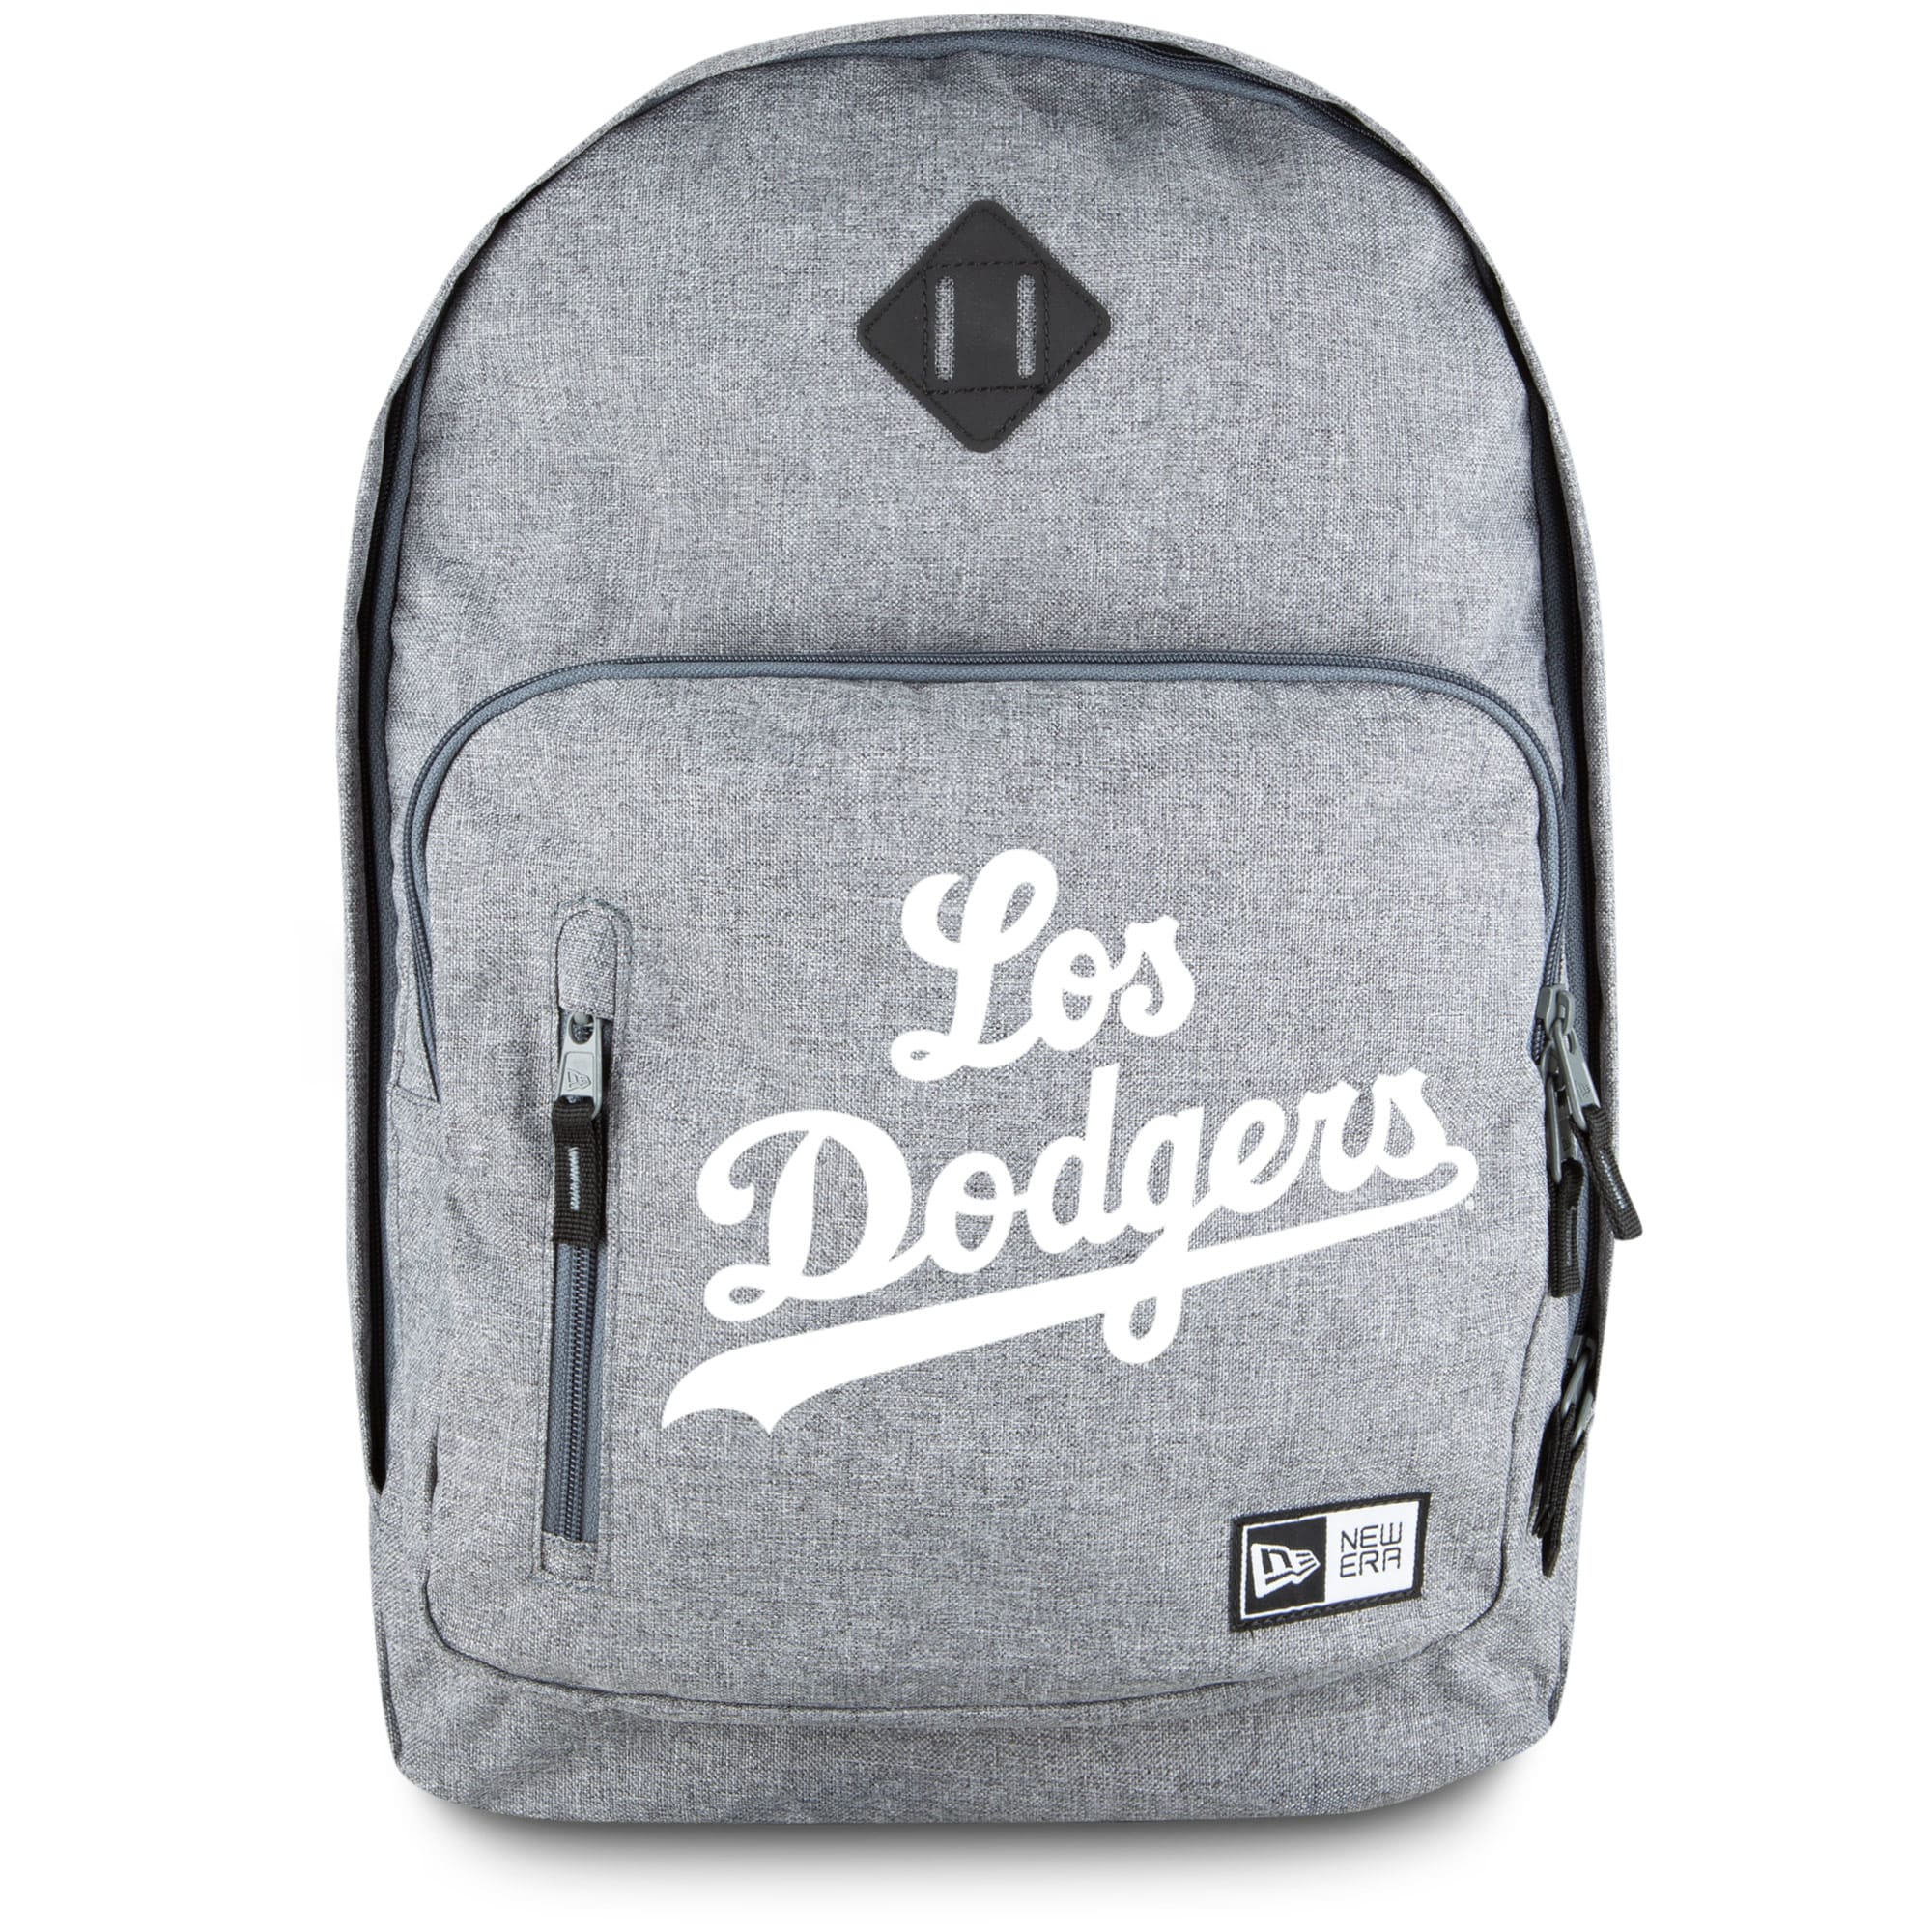 New Era Los Angeles Dodgers Cram City Connect Backpack - image 2 of 5